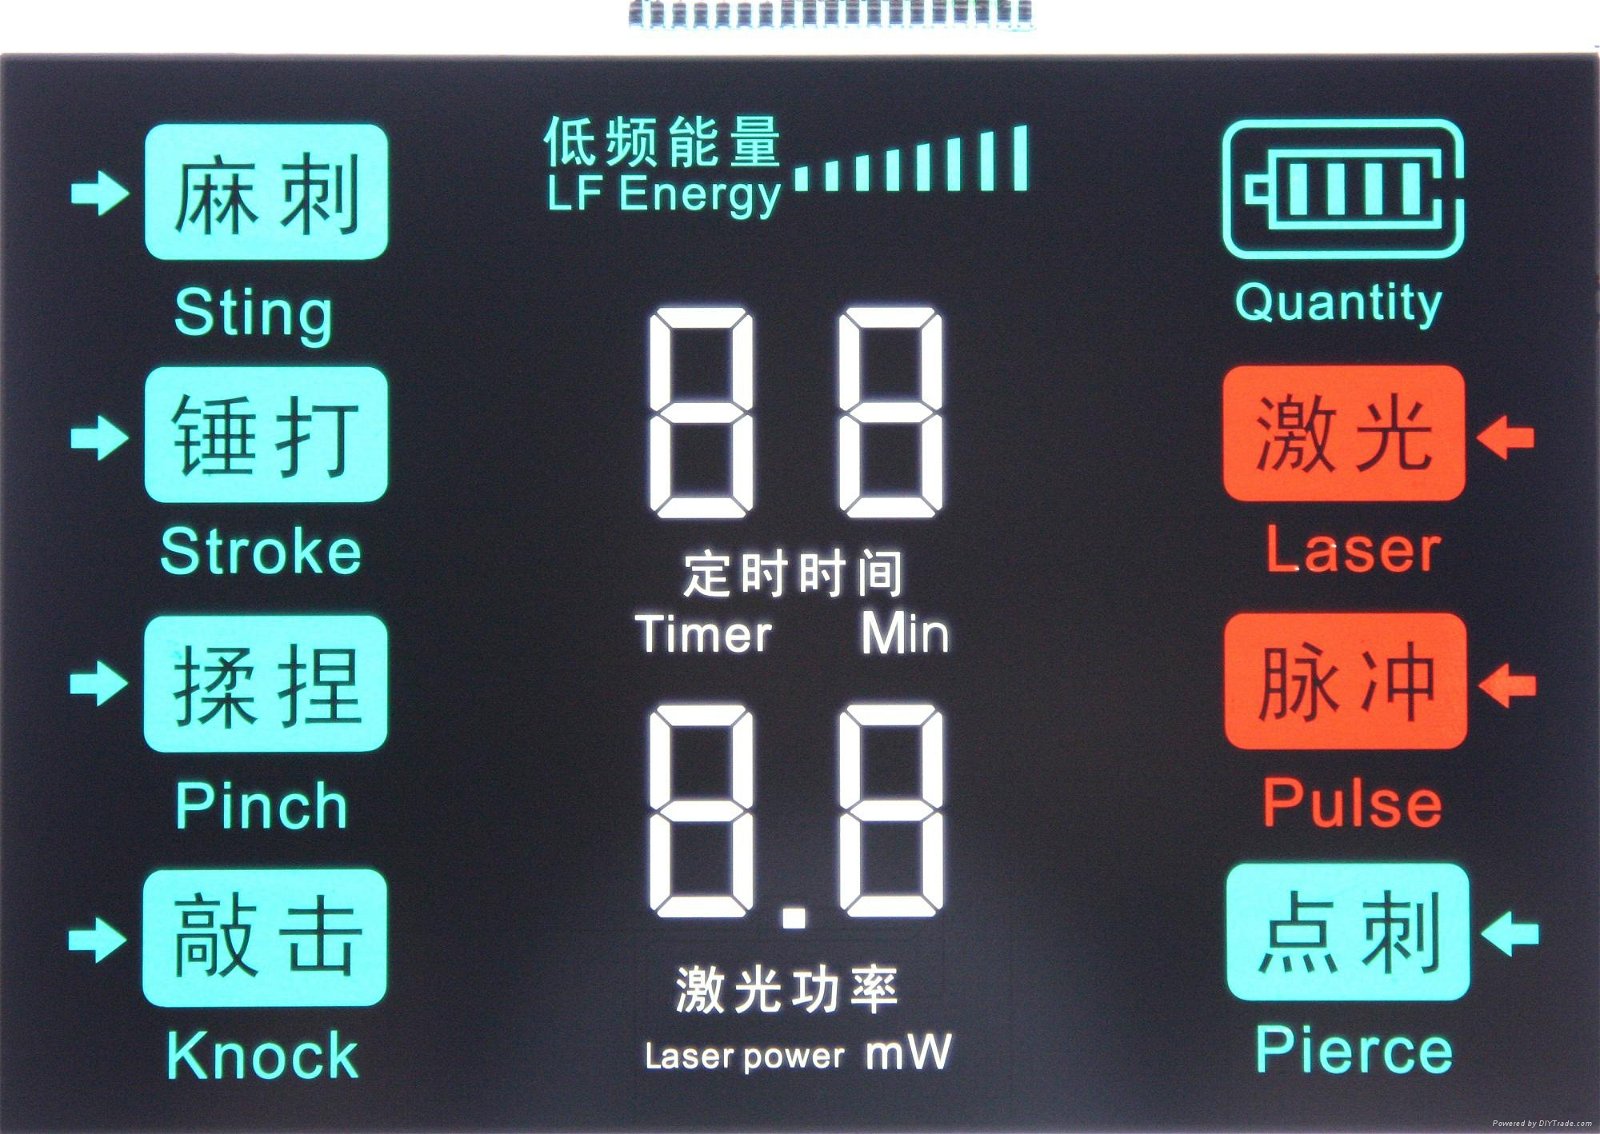  custom medical devices lcd display screen